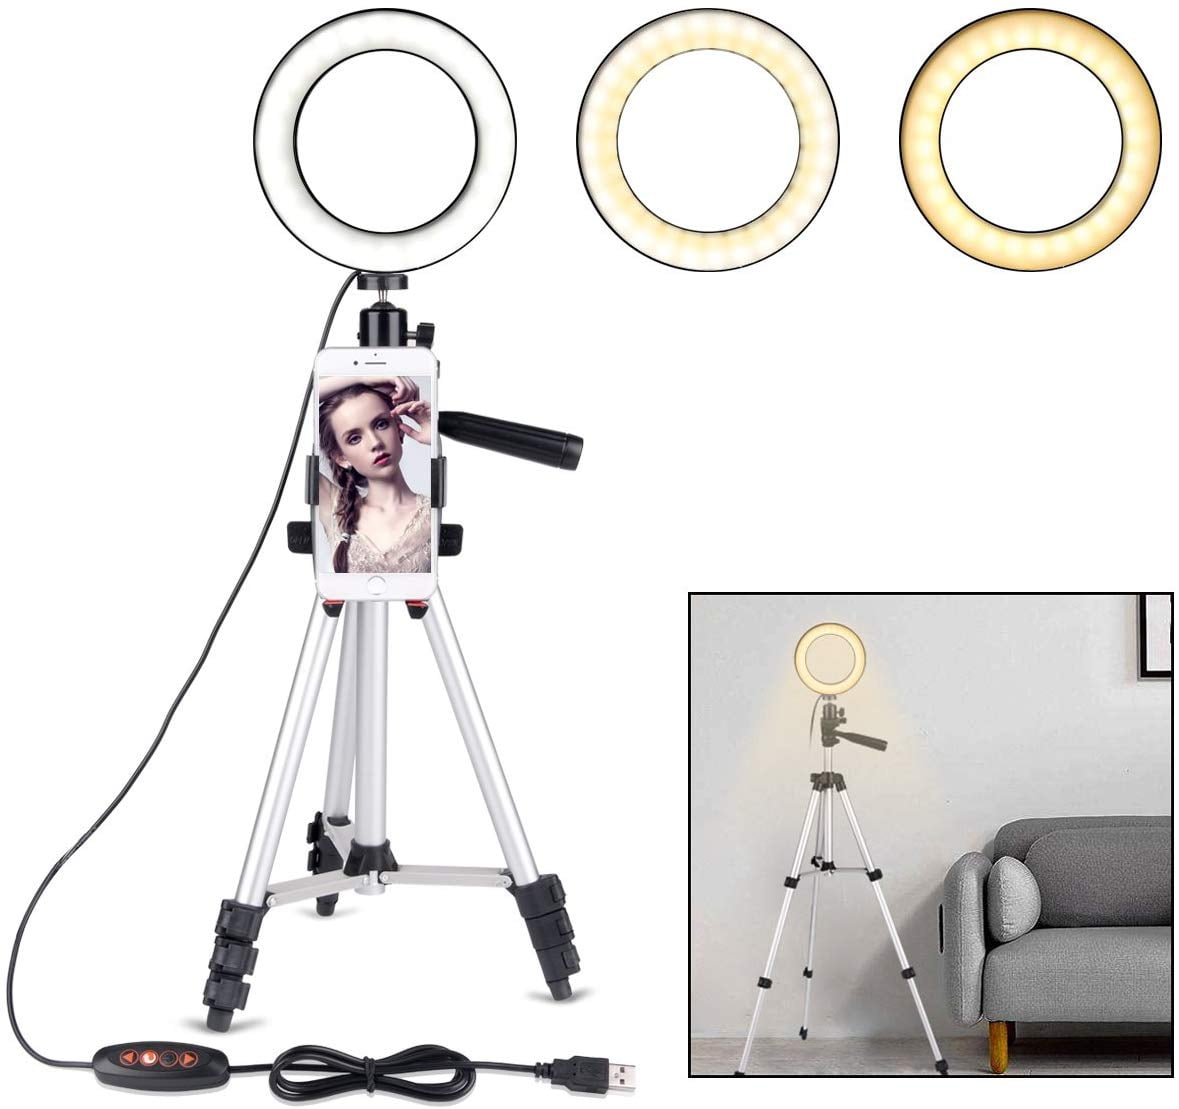 LED Camera Ring Light with Stand and Phone Holder for YouTube Video/Photography Compatible for iPhone Xs Max XR Android Kalawen 10 Selfie Ring Light with Tripod Stand for Live Stream/Makeup